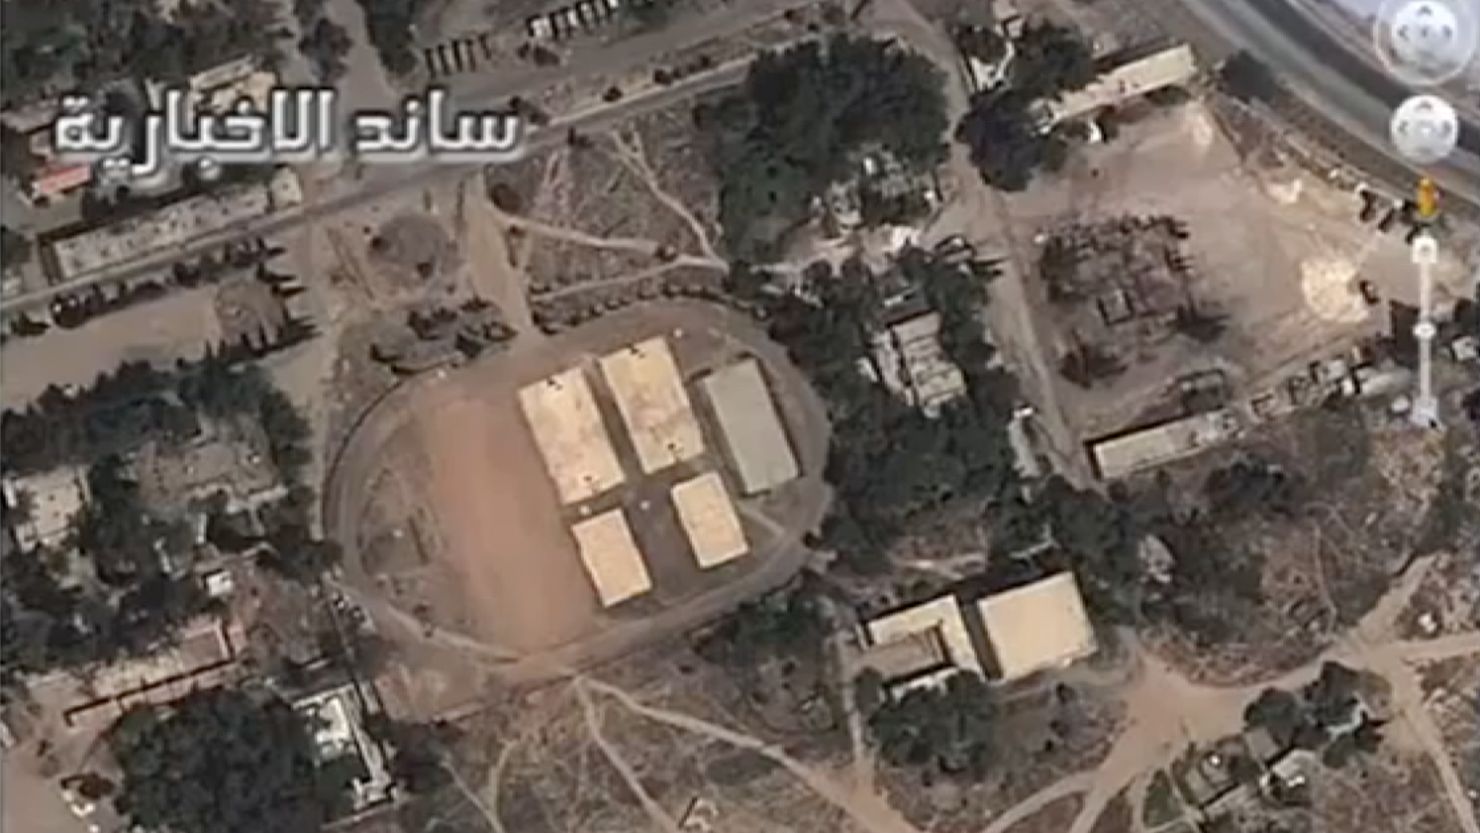 A screen-grab from a YouTube video shows supposed chemical weapons sites in Syria.